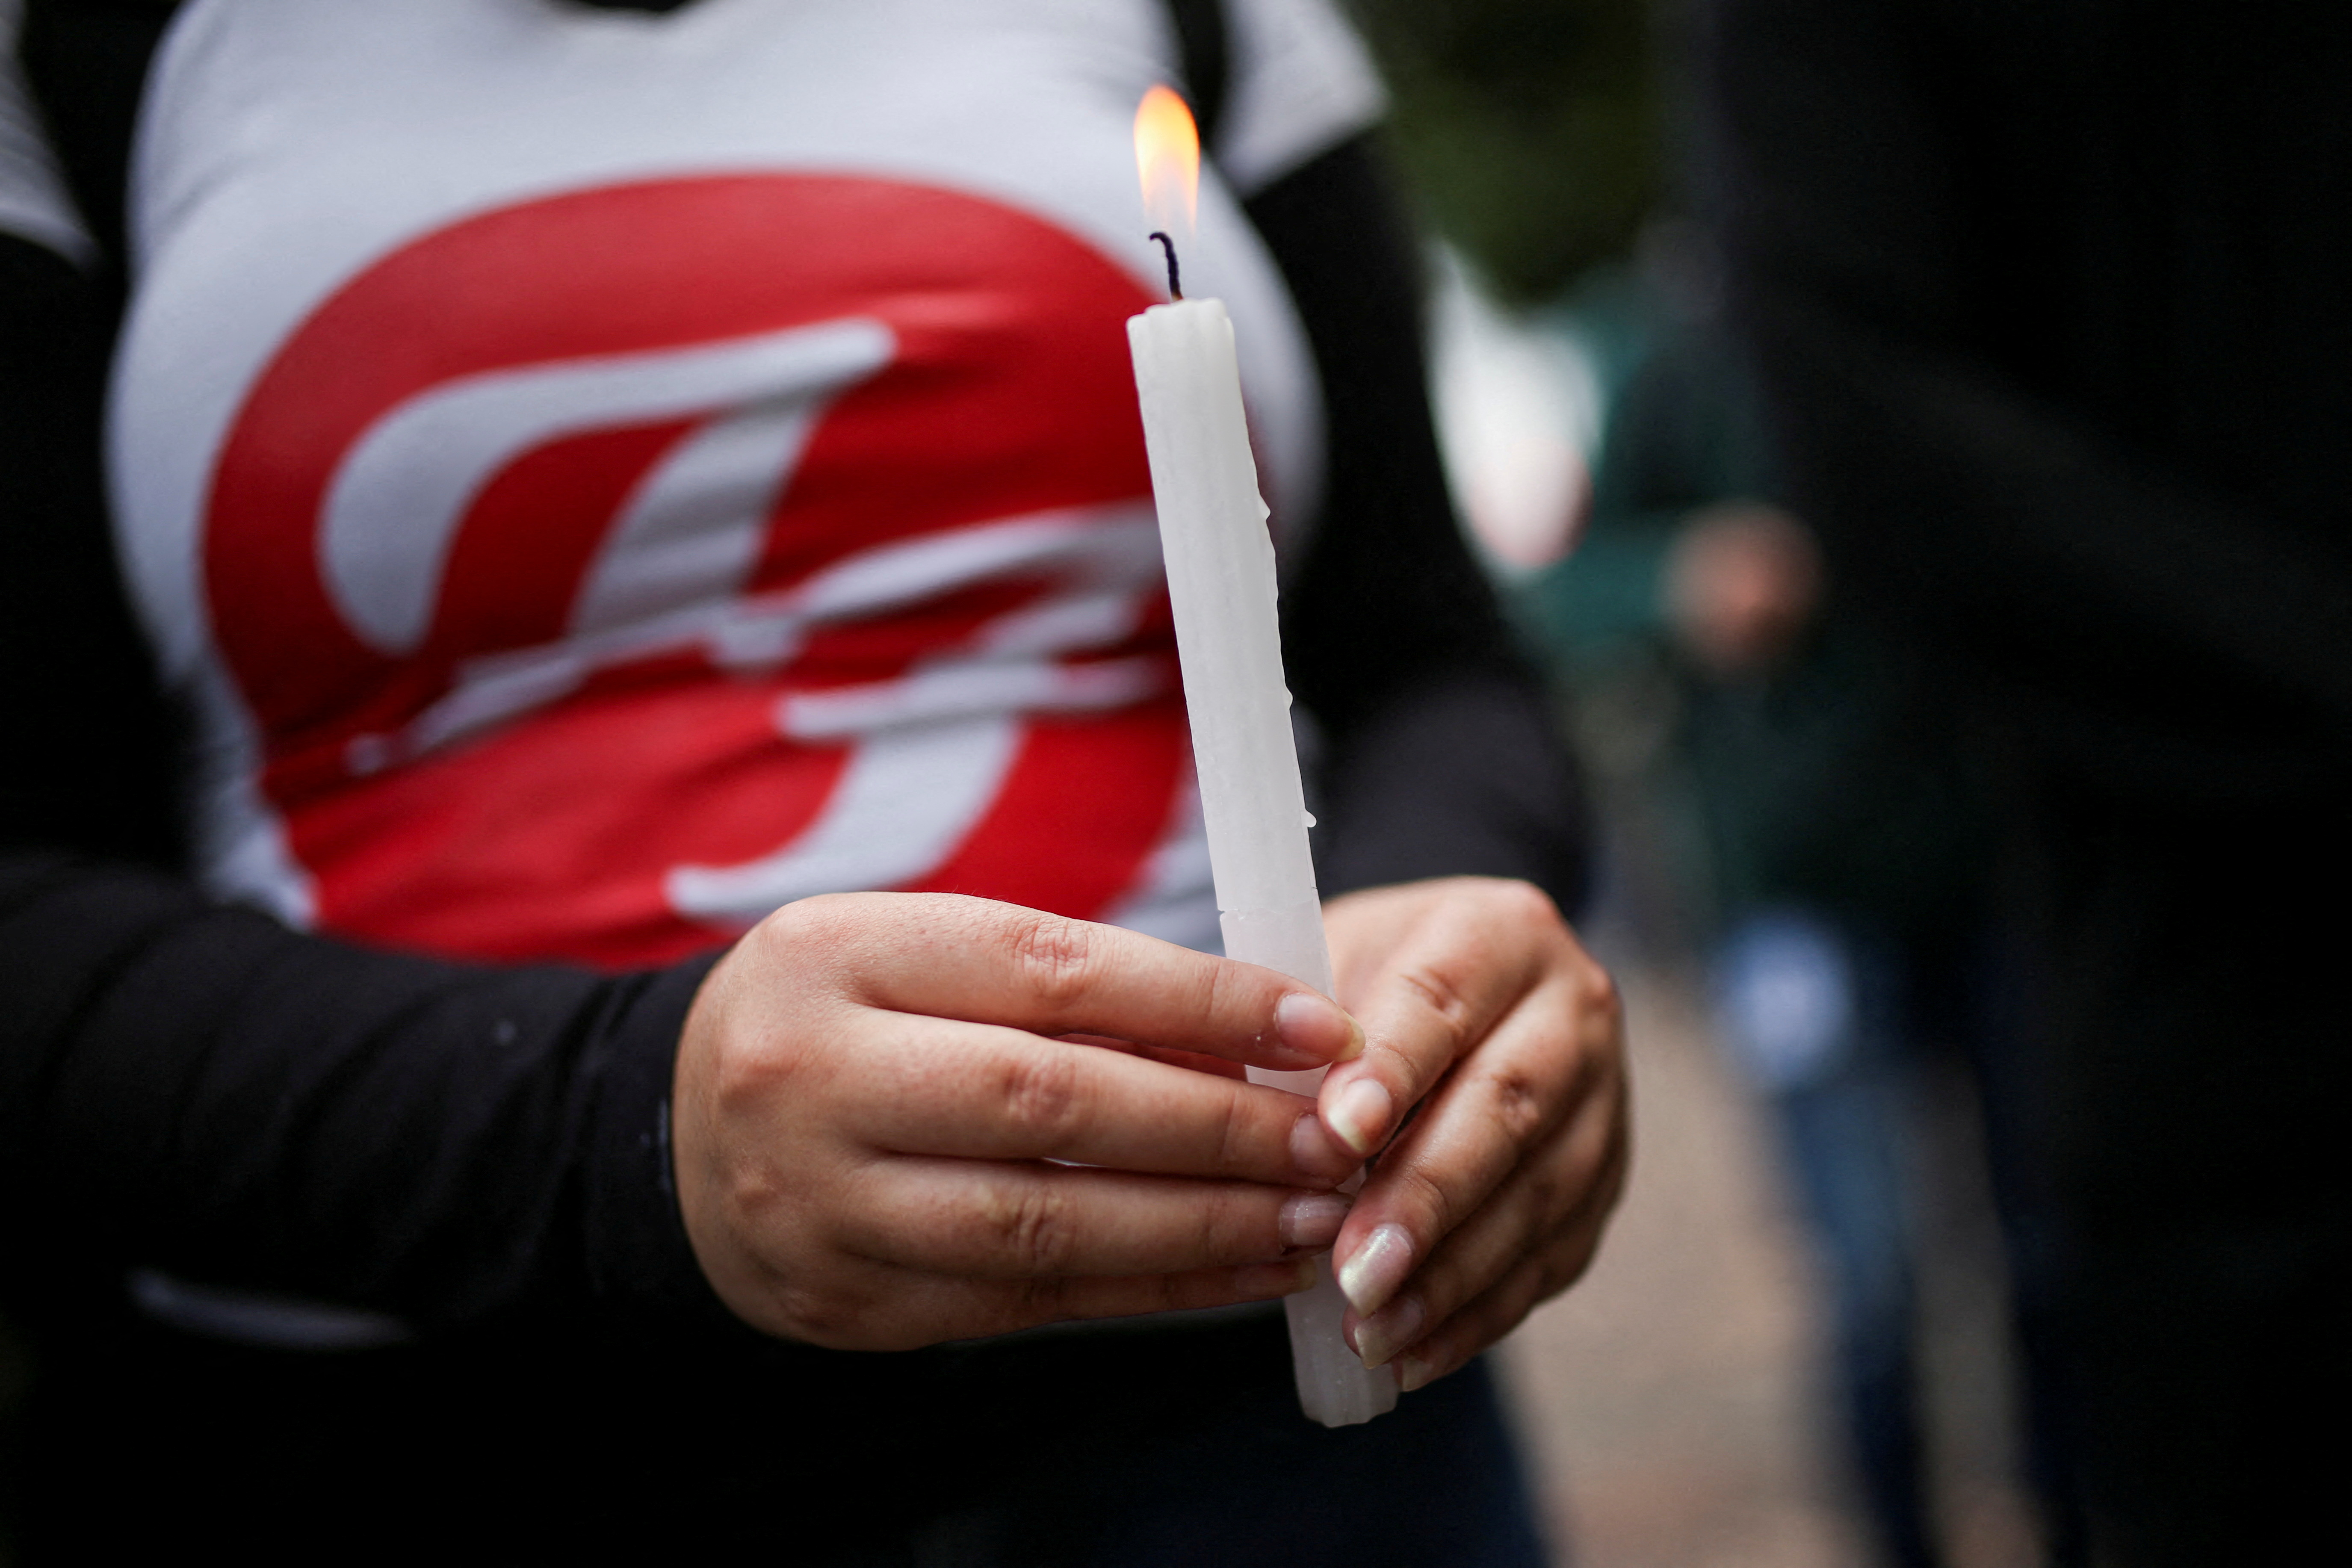 A woman holds a candle outside the Casa Medina hotel where Taylor Hawkins, the band's drummer, died before appearing at the Estereo Picnic festival in Bogota, Colombia March 26, 2022. REUTERS/Luisa Gonzalez REFILE - CORRECTING INFORMATION